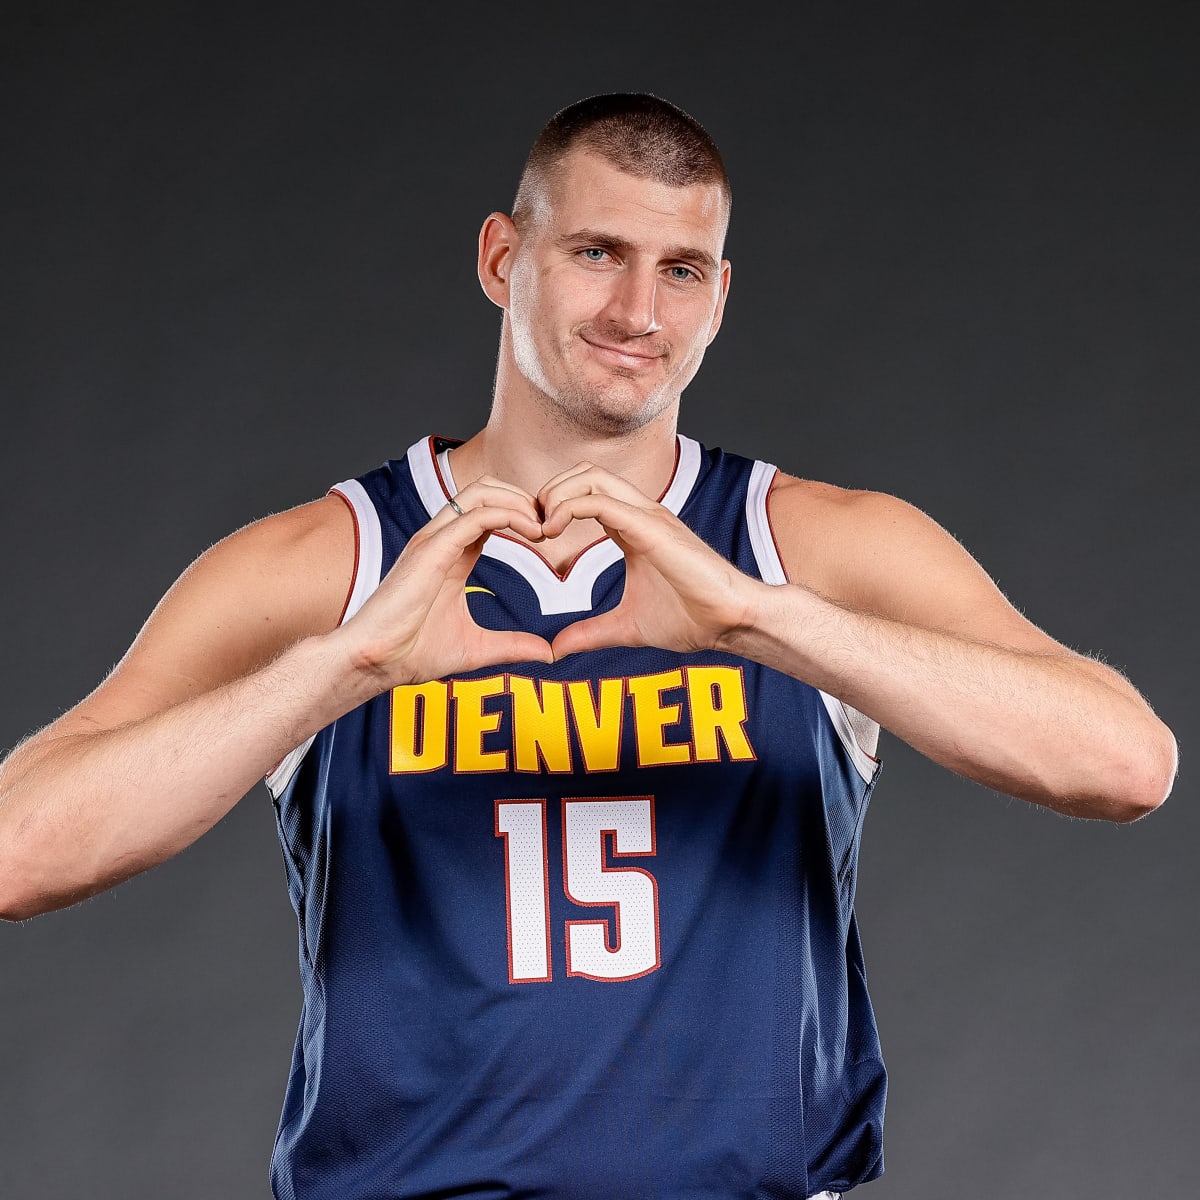 Nikola Jokic Is One of the NBA's Most Beloved, Dominant Players